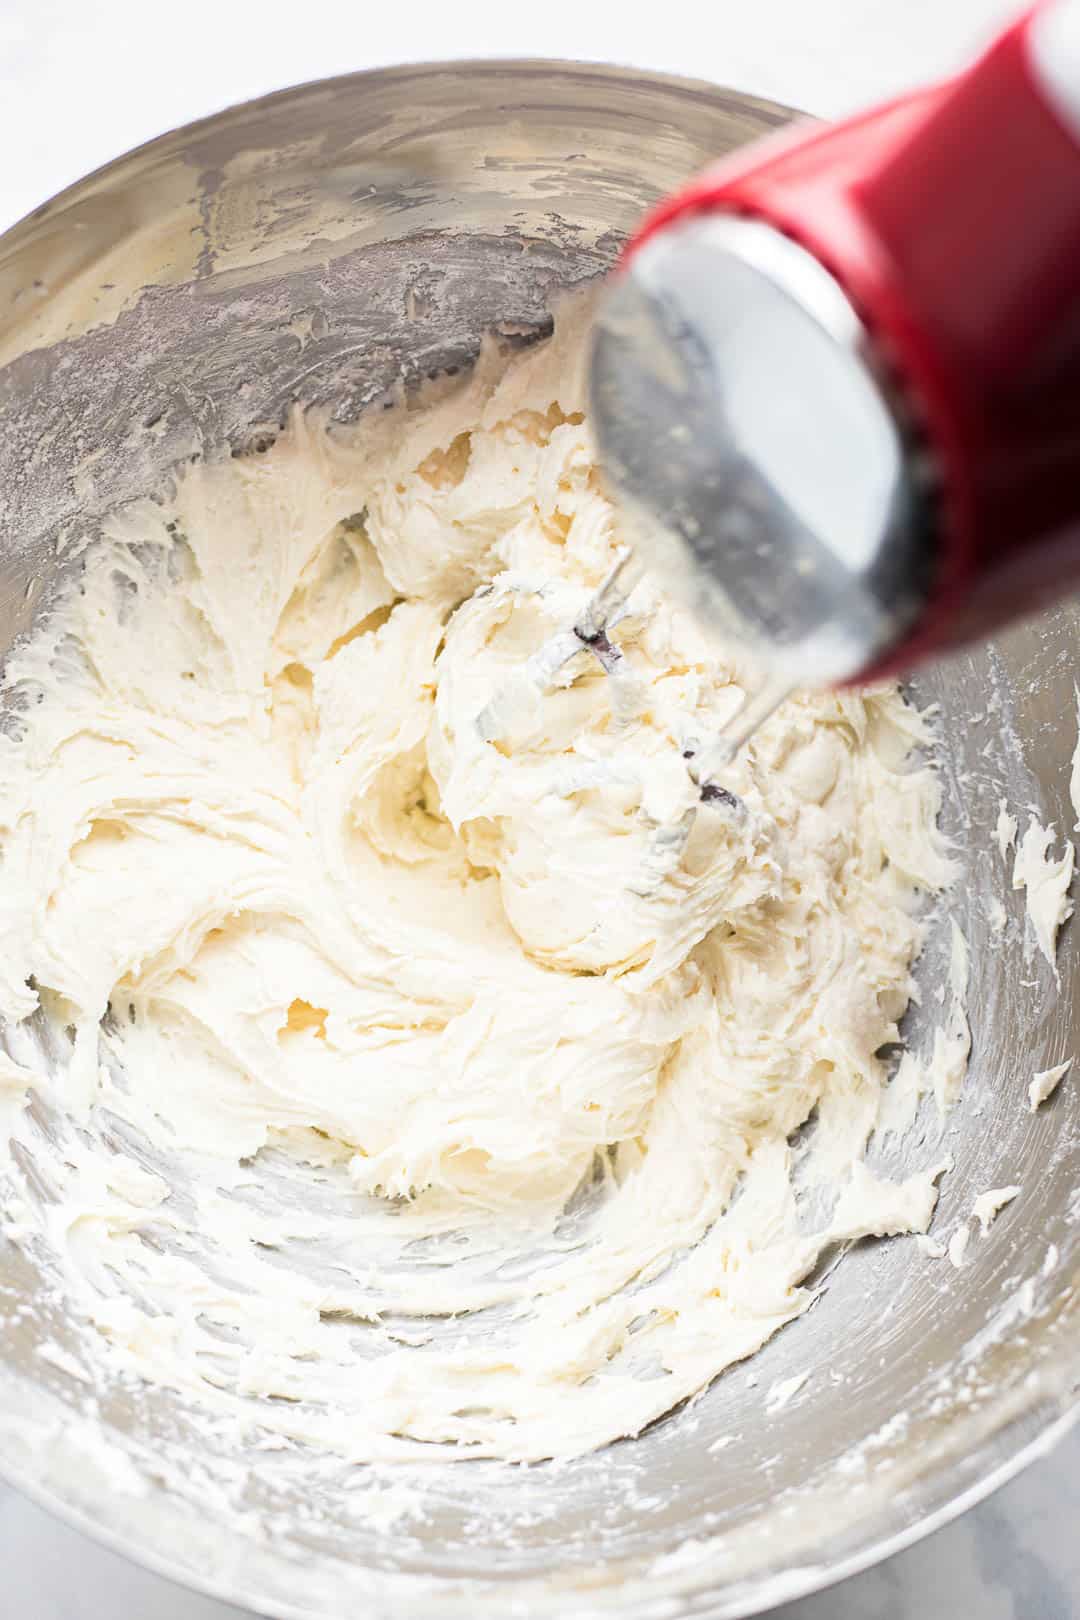 Process shot of beating cream cheese frosting in a bowl